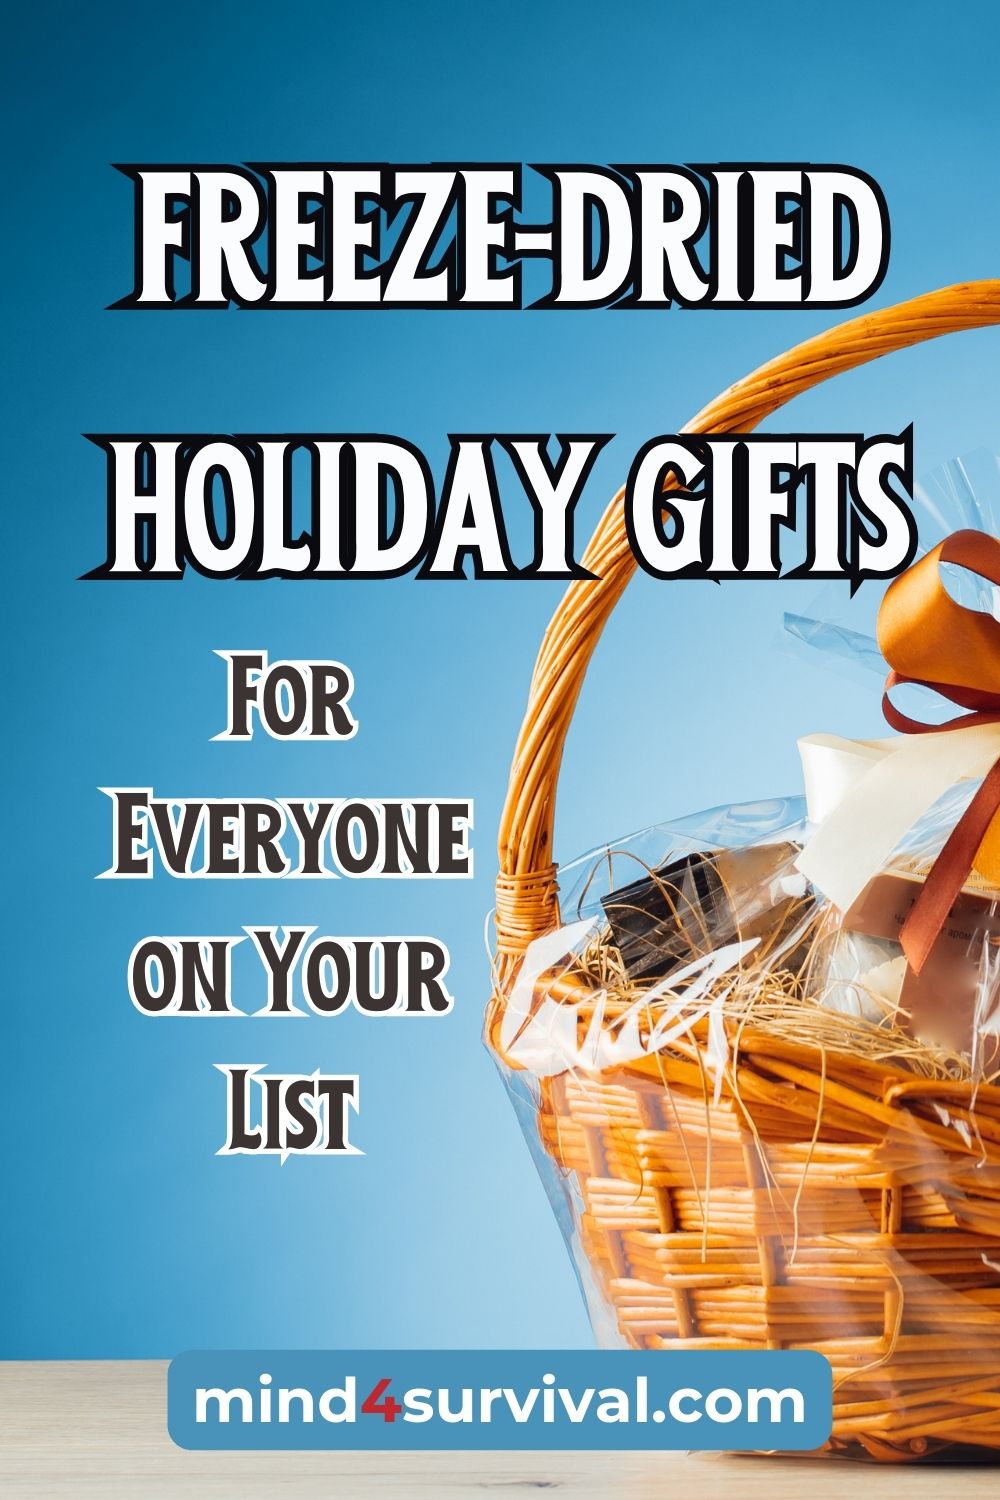 Freeze Dried Holiday Gifts for Everyone on Your List!